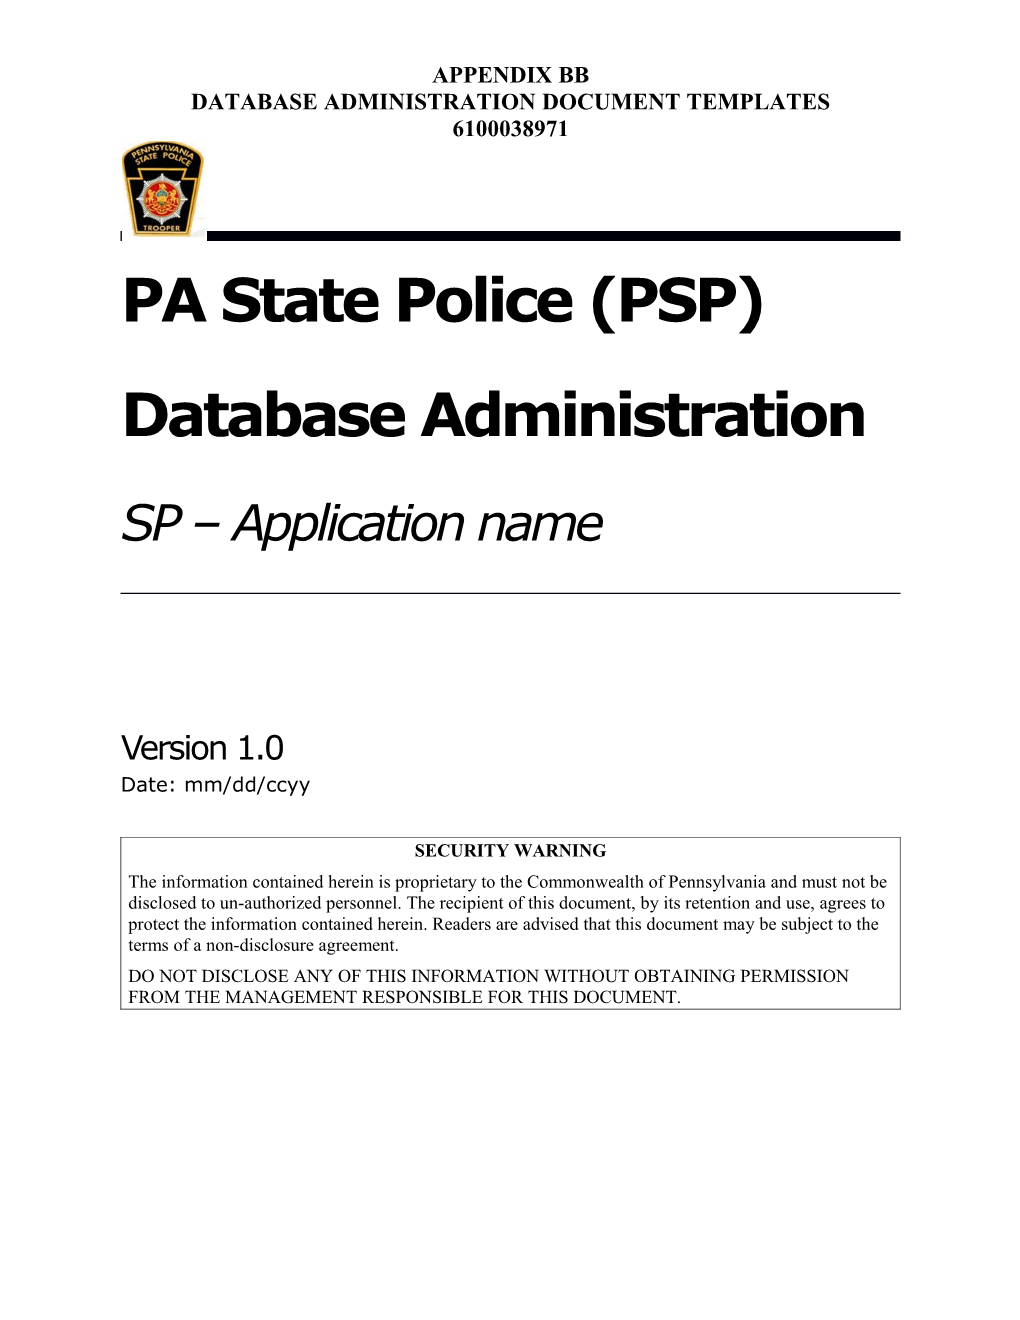 Database Administration Document Templates